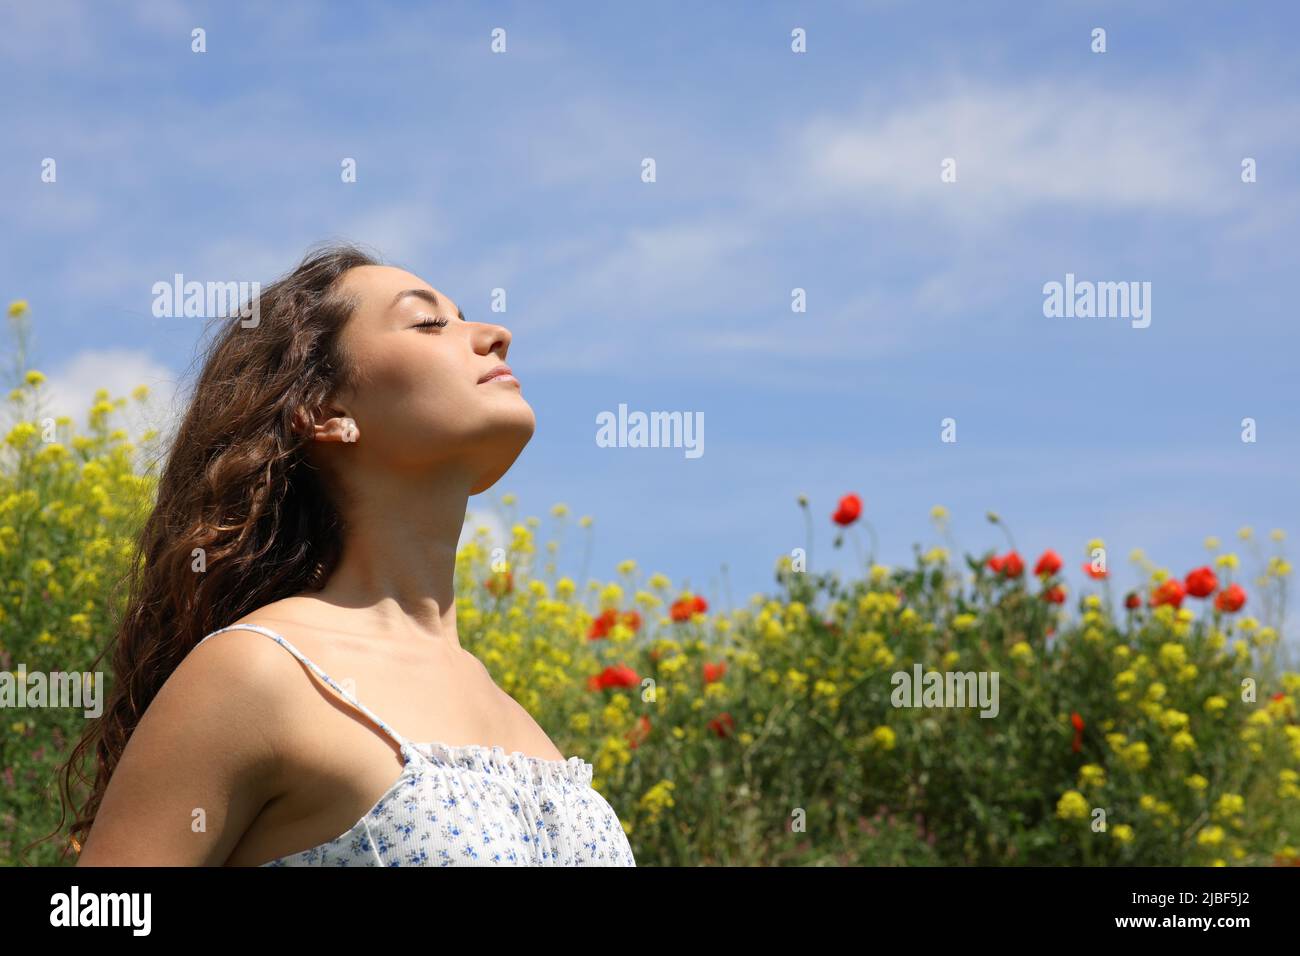 Relaxed woman breathing fresh air in a flowers field Stock Photo